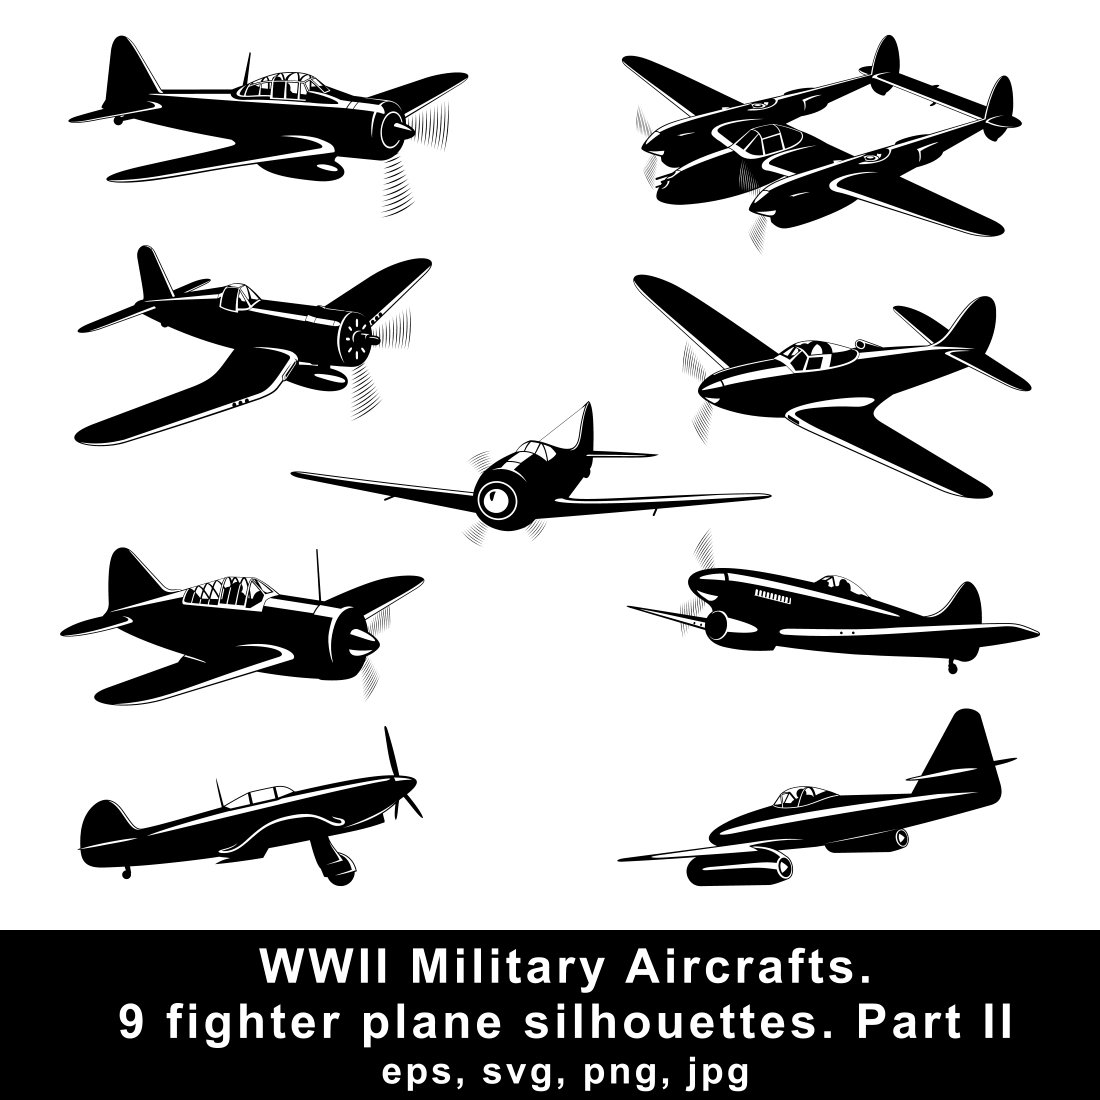 WWII Aircrafts Fighter Planes Silhouettes cover image.